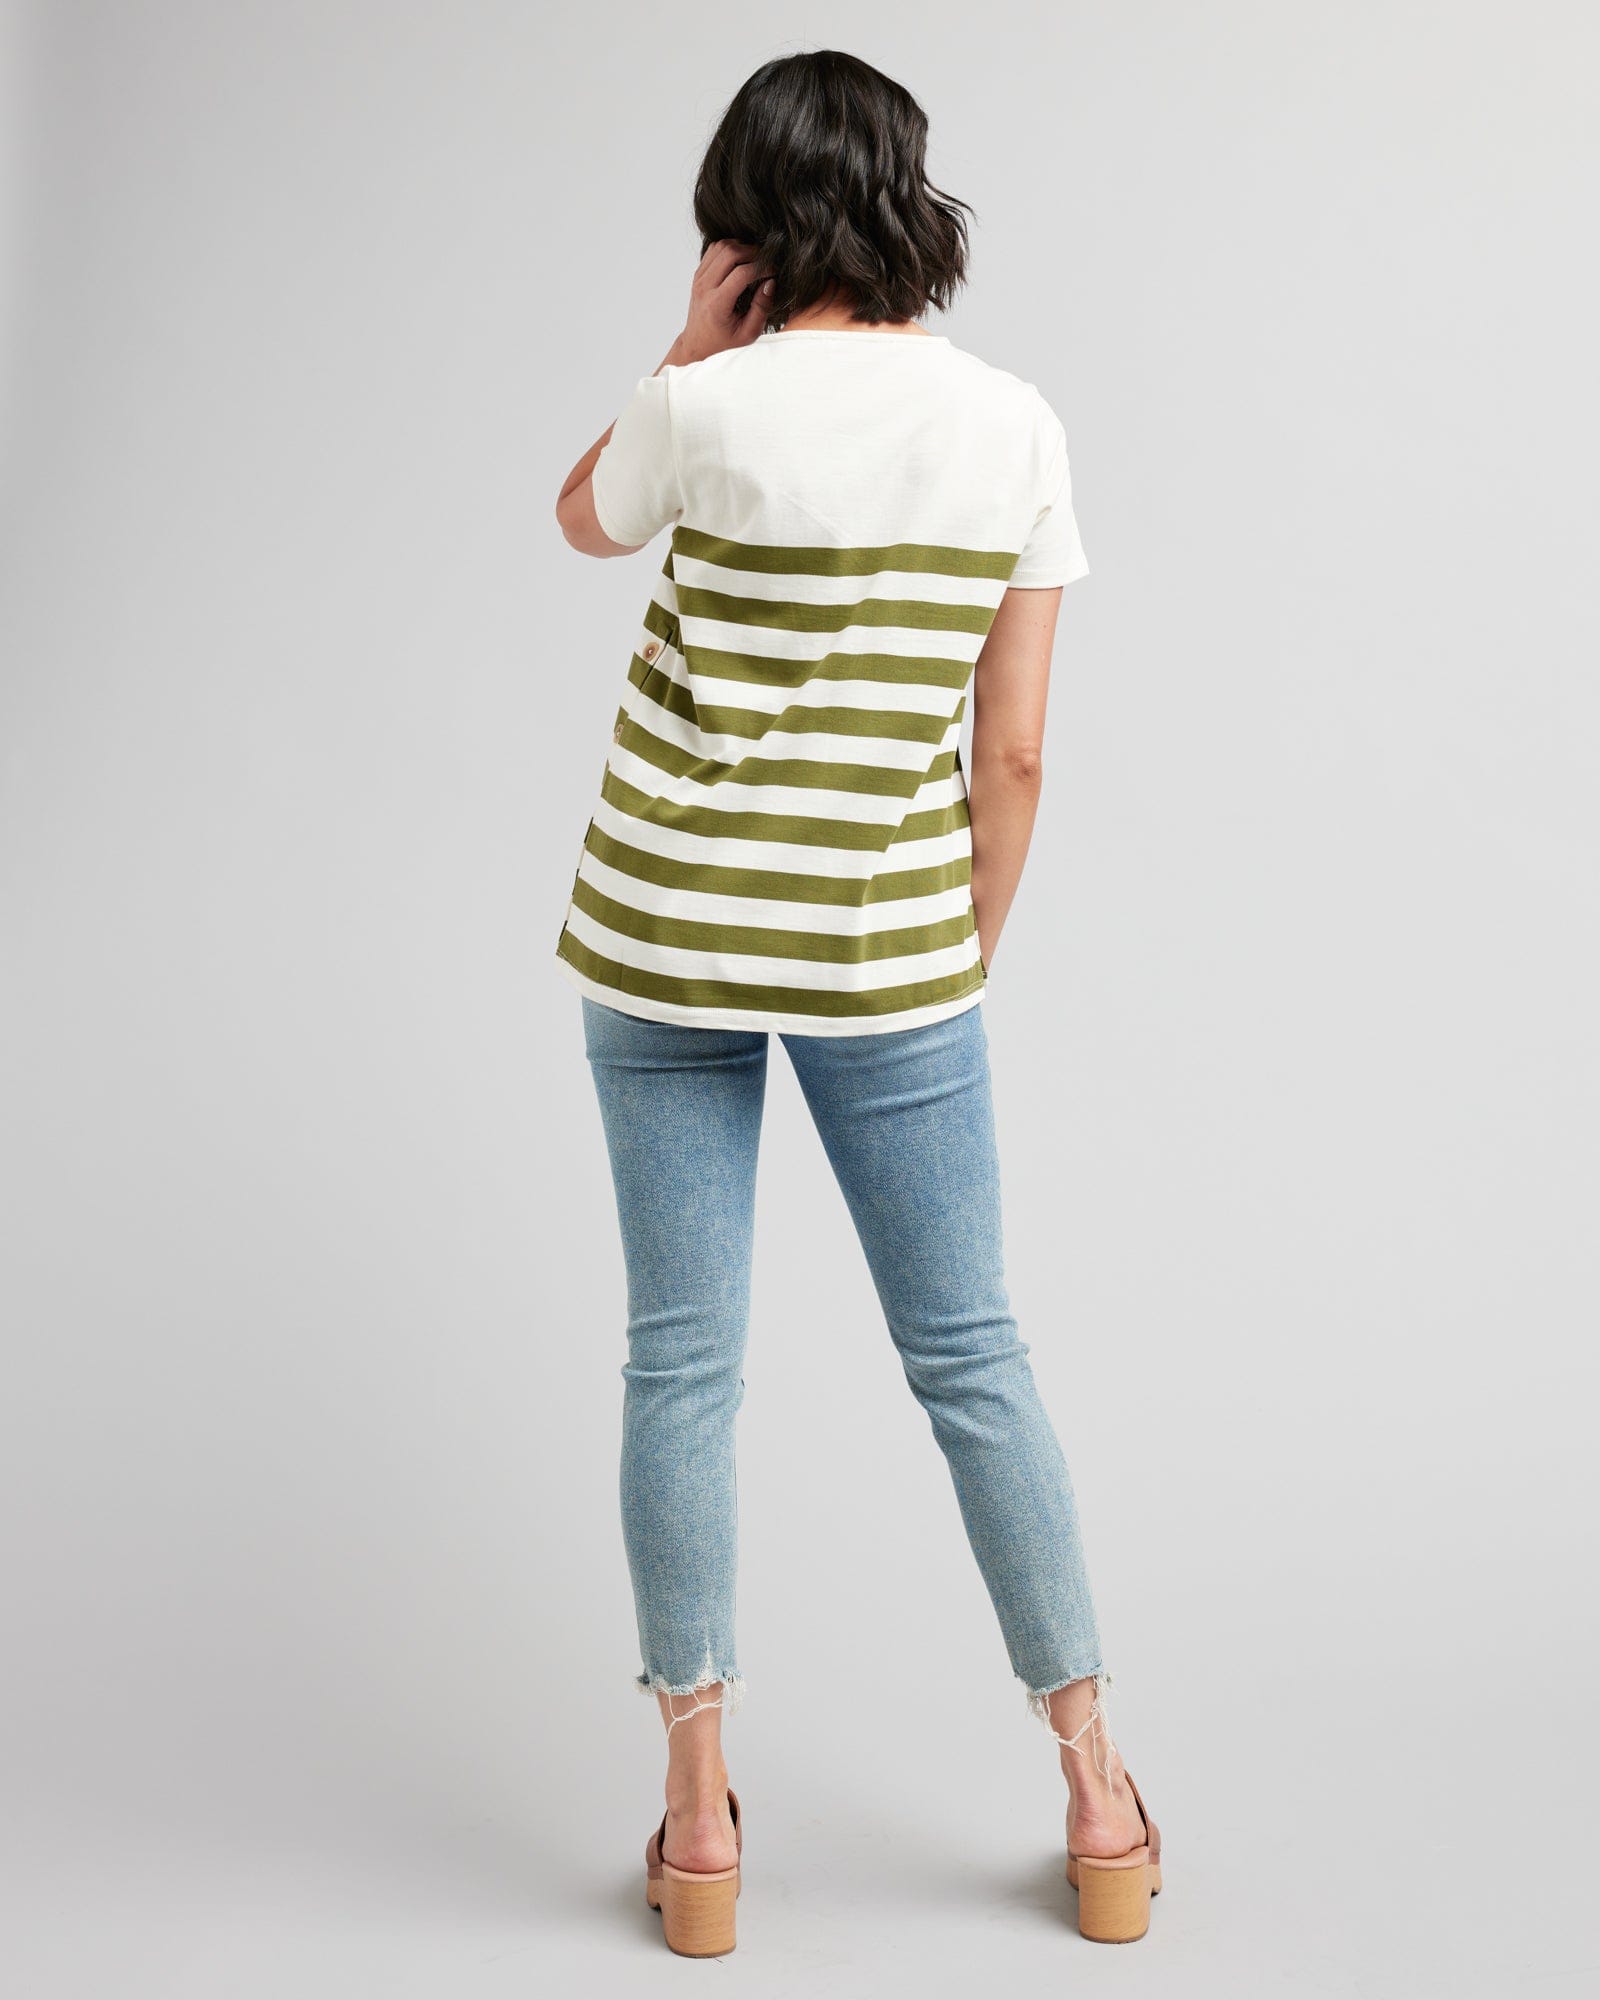 Woman in a short sleeve, green and white striped top